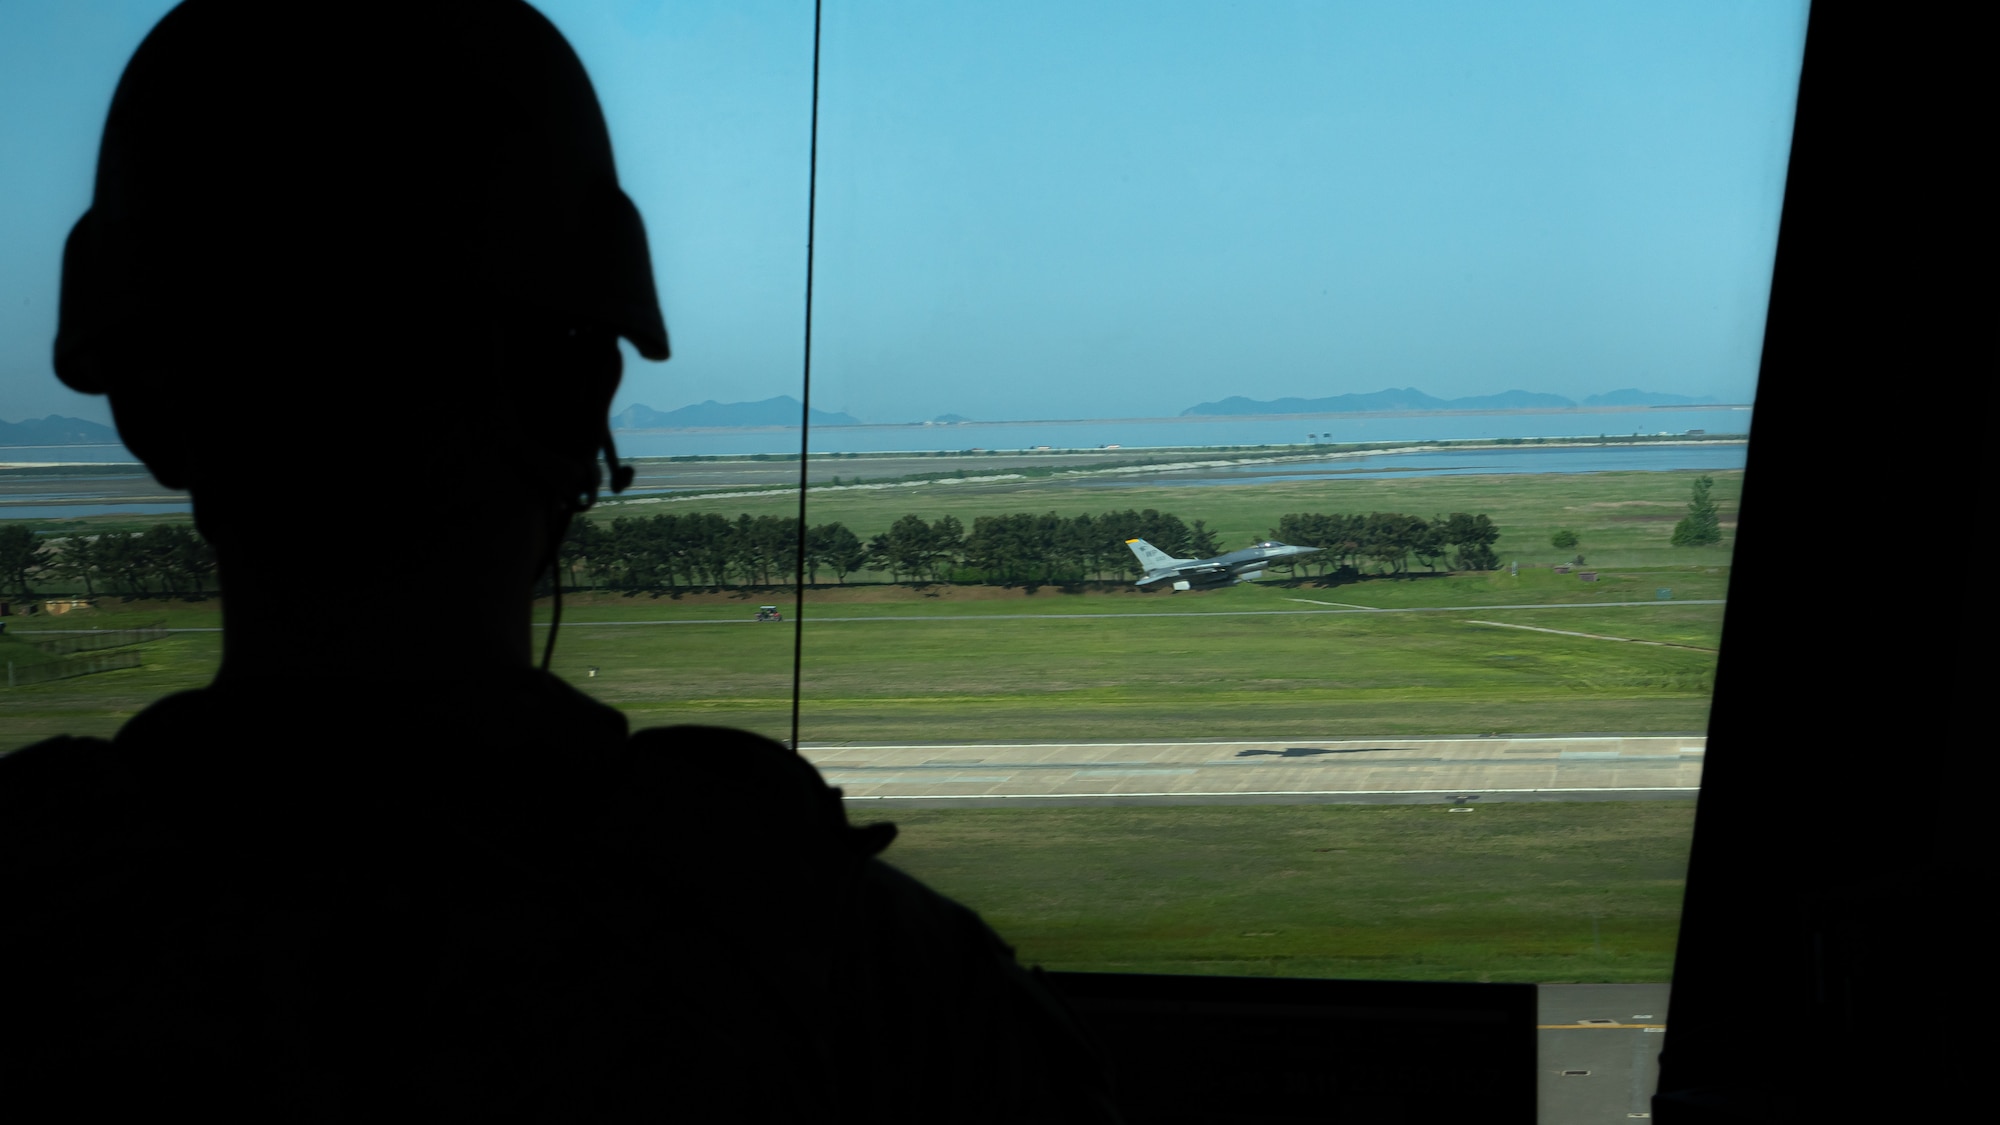 A member of the 8th Operation Support Squadron watches from the air traffic control tower as an F-16 Fighting Falcon takes off.